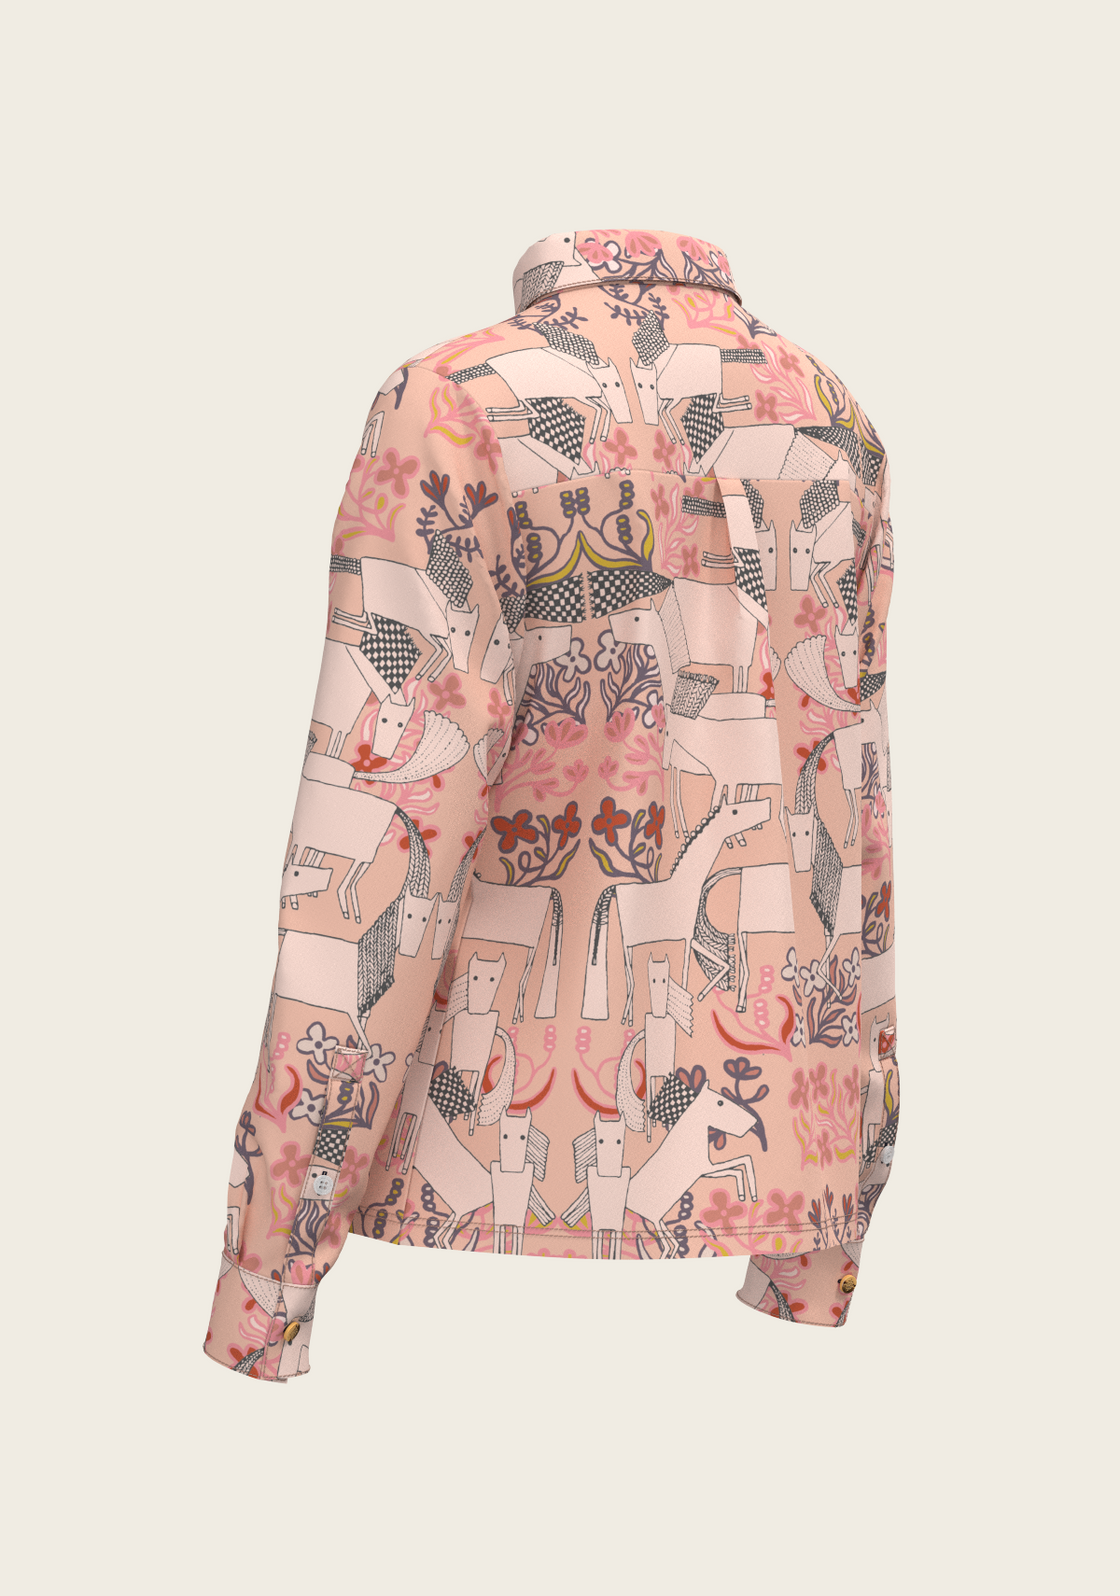  Maize on Peach Loose Fitting Button Shirt